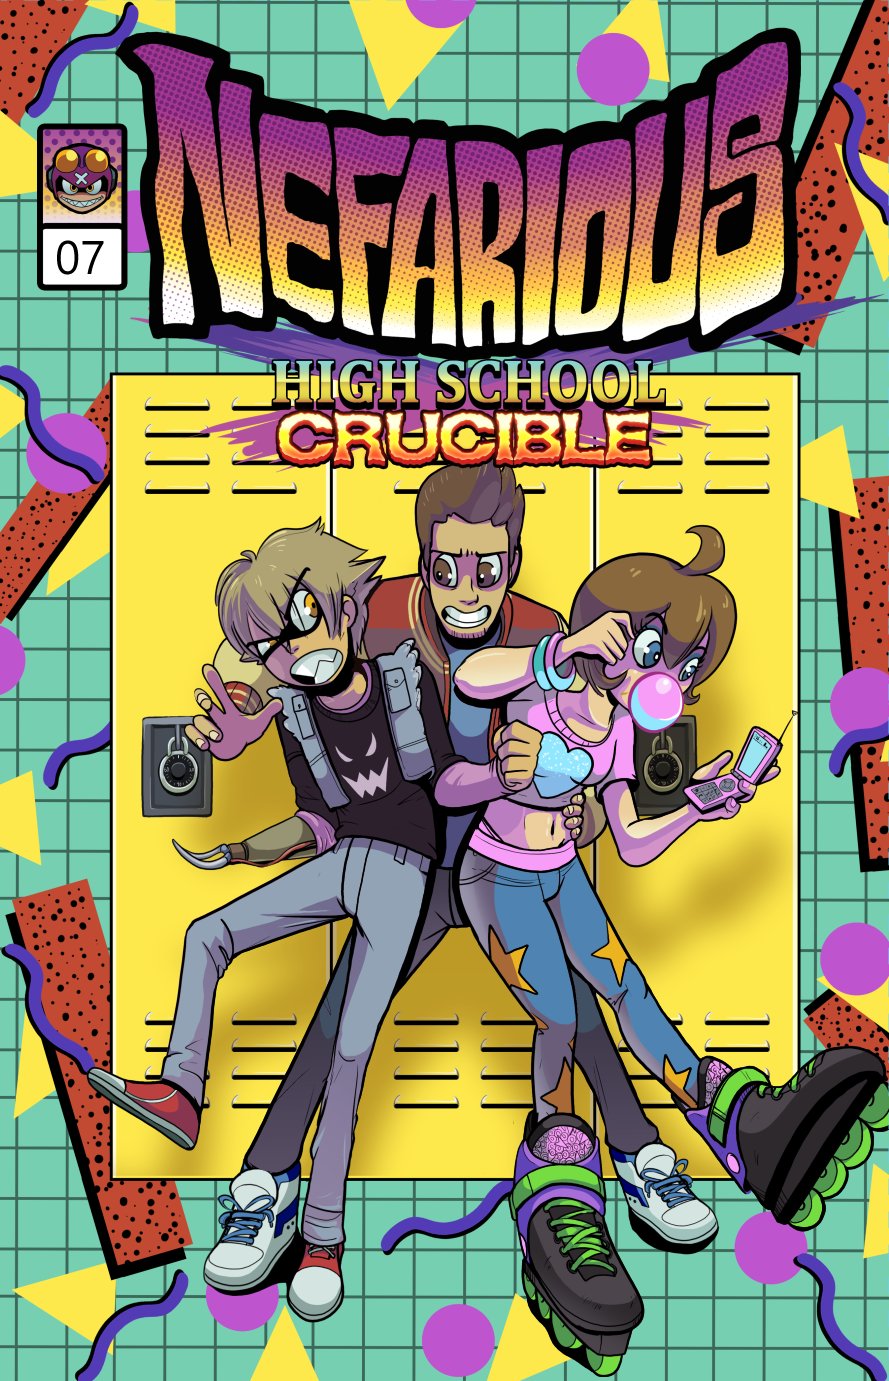 Josh on X: Now on Patreon. Nefarious issue 7: High School Crucible. The  future villain, hero and princess of Macro City have their histories  examined as high school students t.conob3zUPt62  t.coEoT6Fj0ugc 